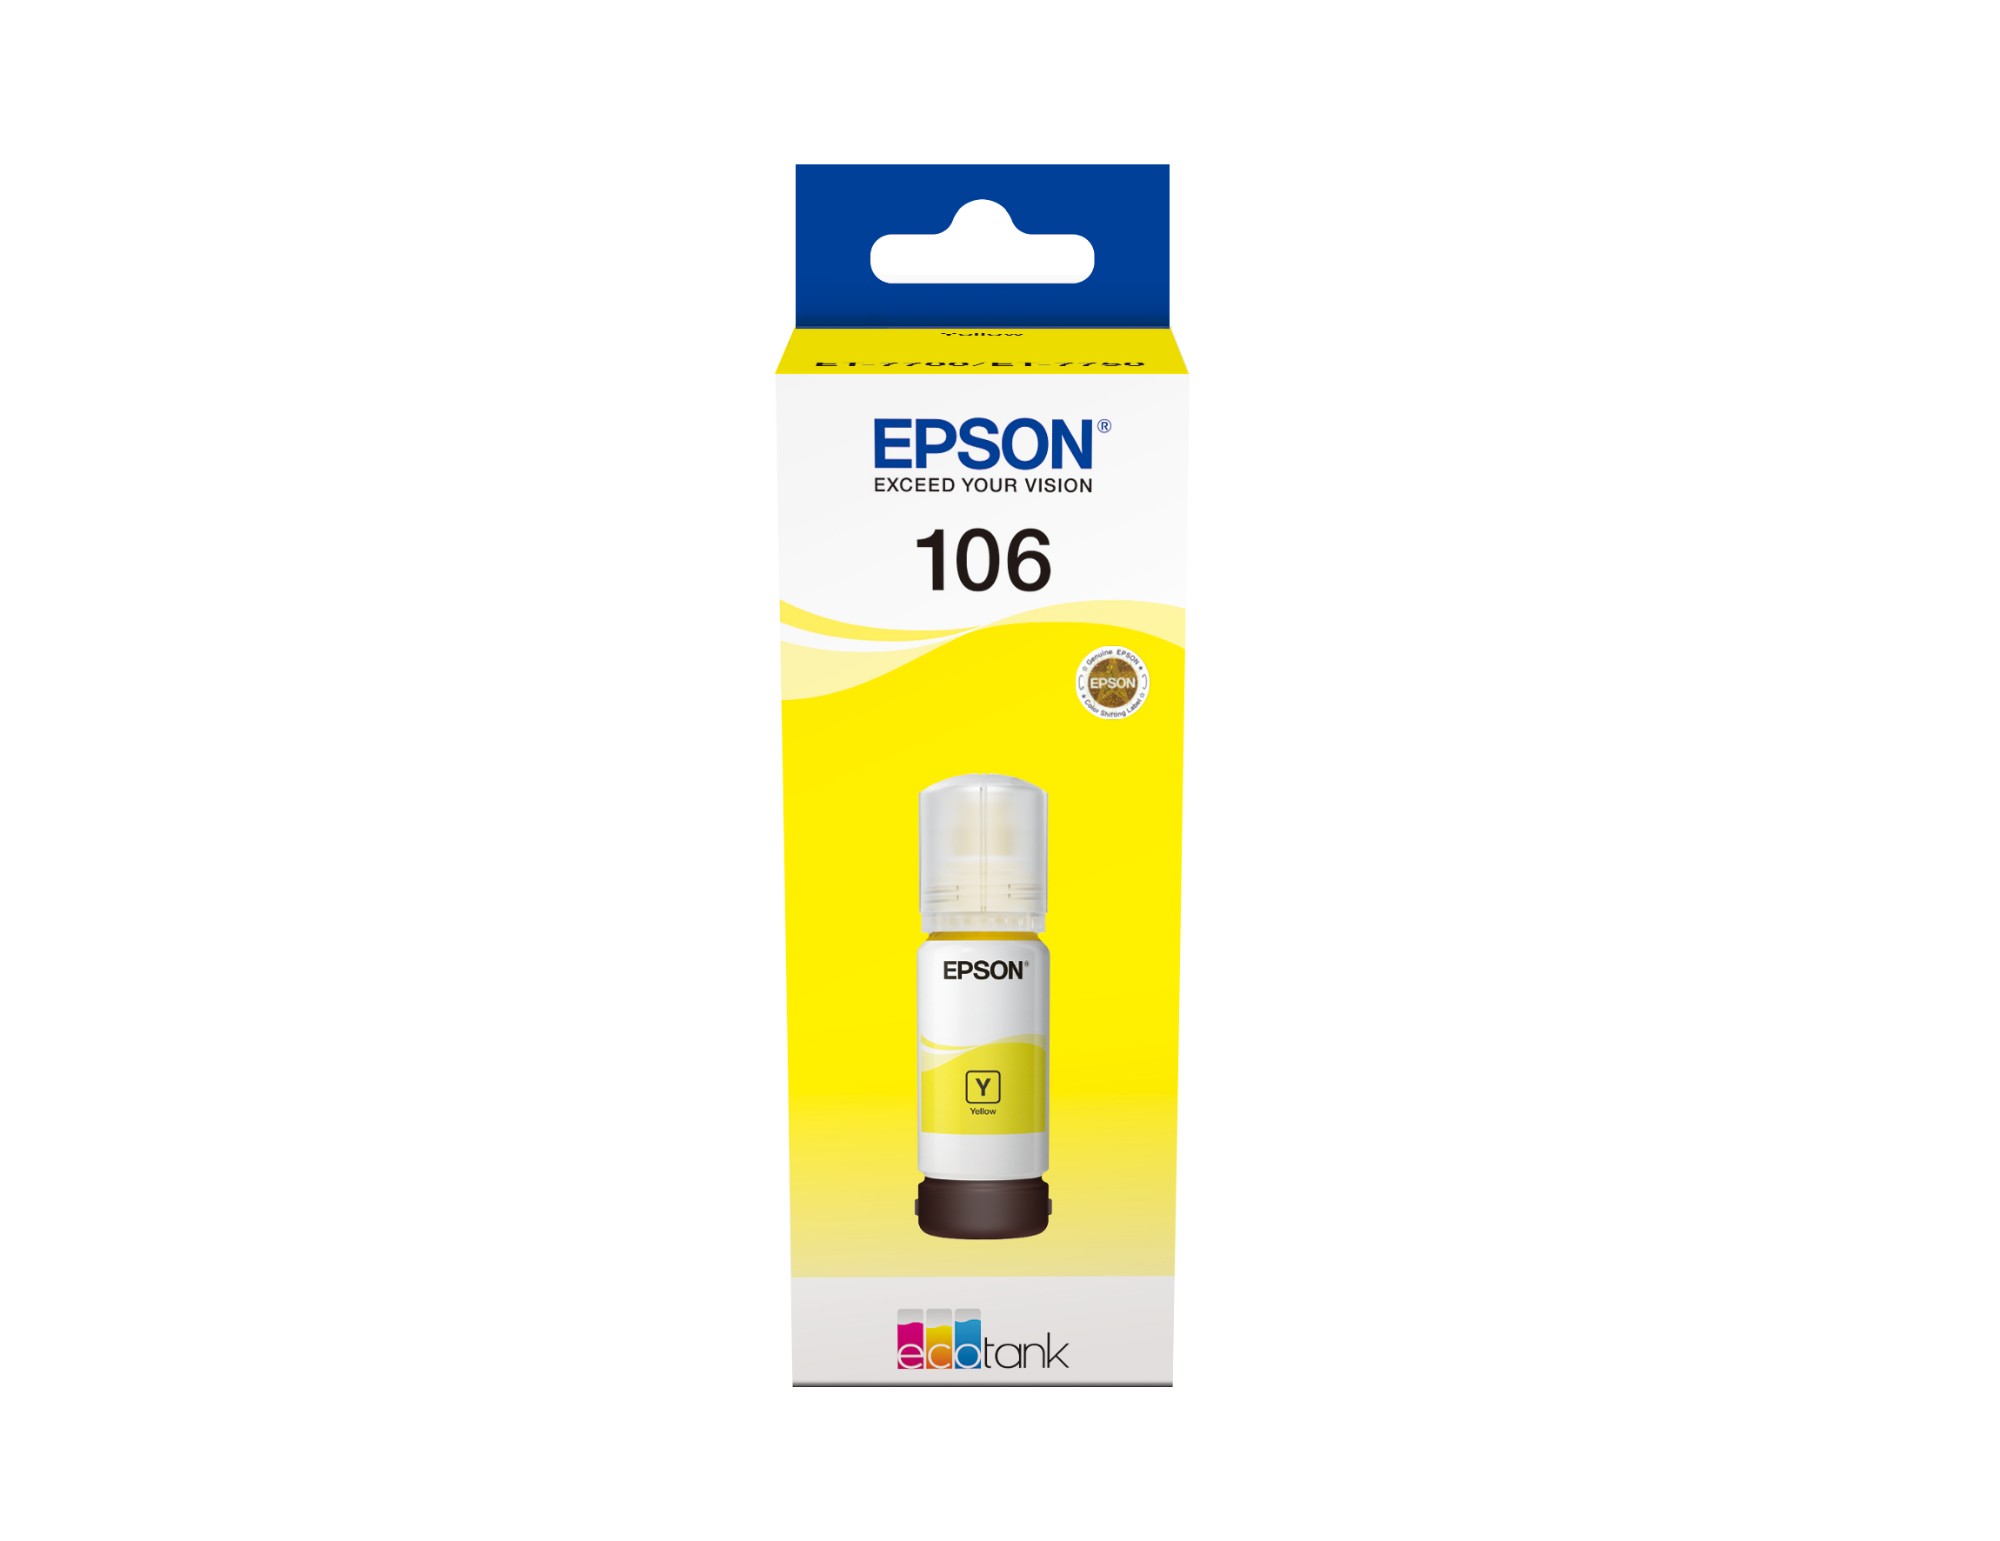 Photos - Inks & Toners Epson C13T00R440/106 Ink bottle yellow, 5K pages 3400 Photos 70ml for 